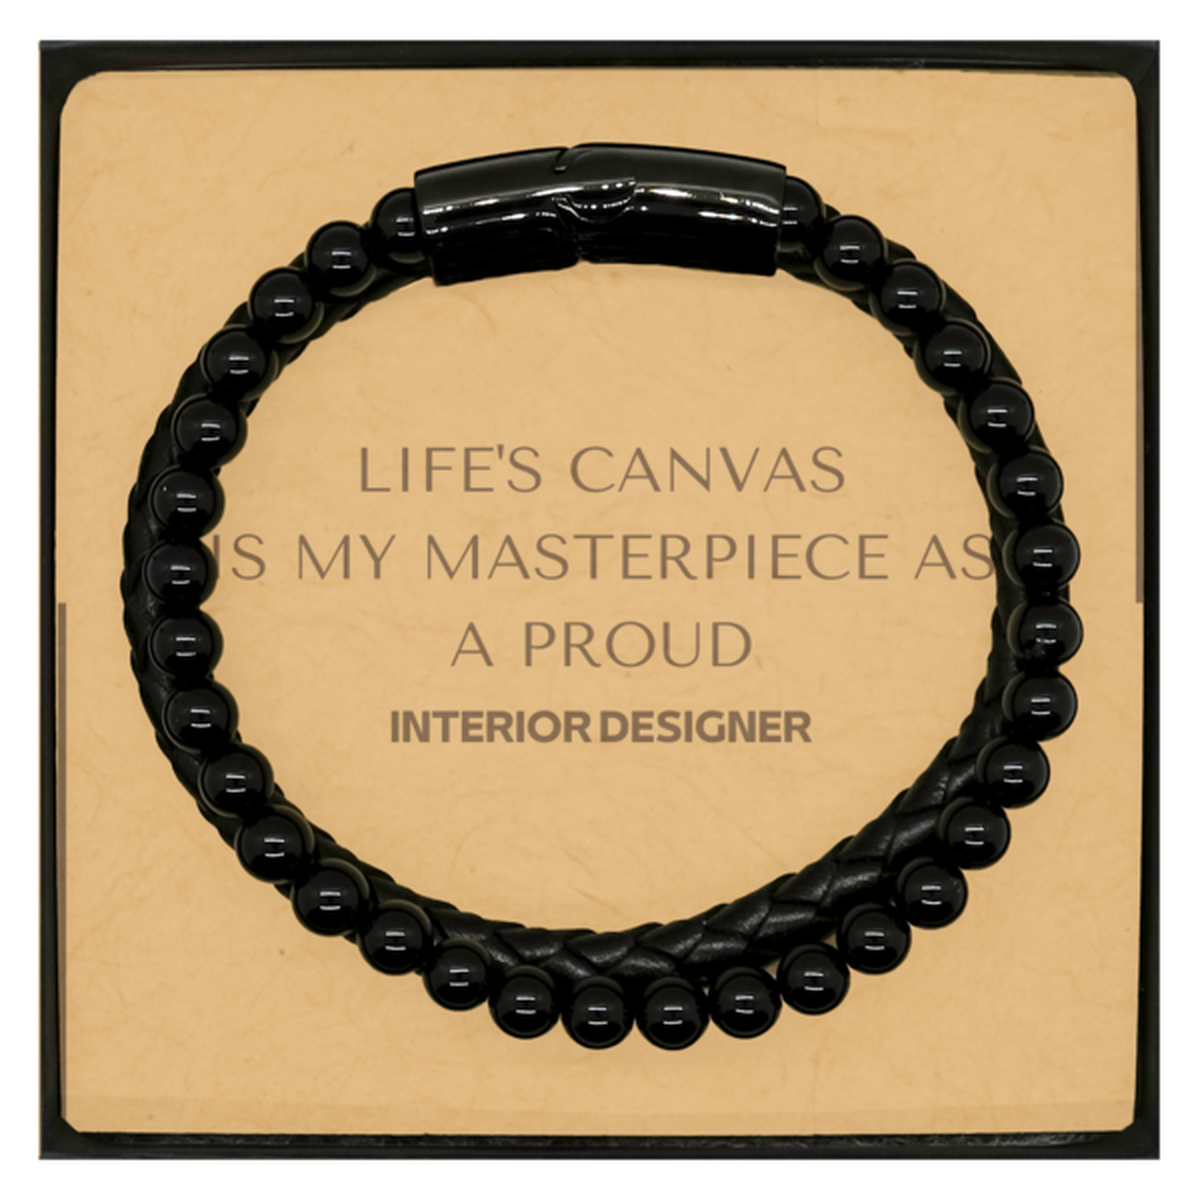 Proud Interior Designer Gifts, Life's canvas is my masterpiece, Epic Birthday Christmas Unique Stone Leather Bracelets For Interior Designer, Coworkers, Men, Women, Friends